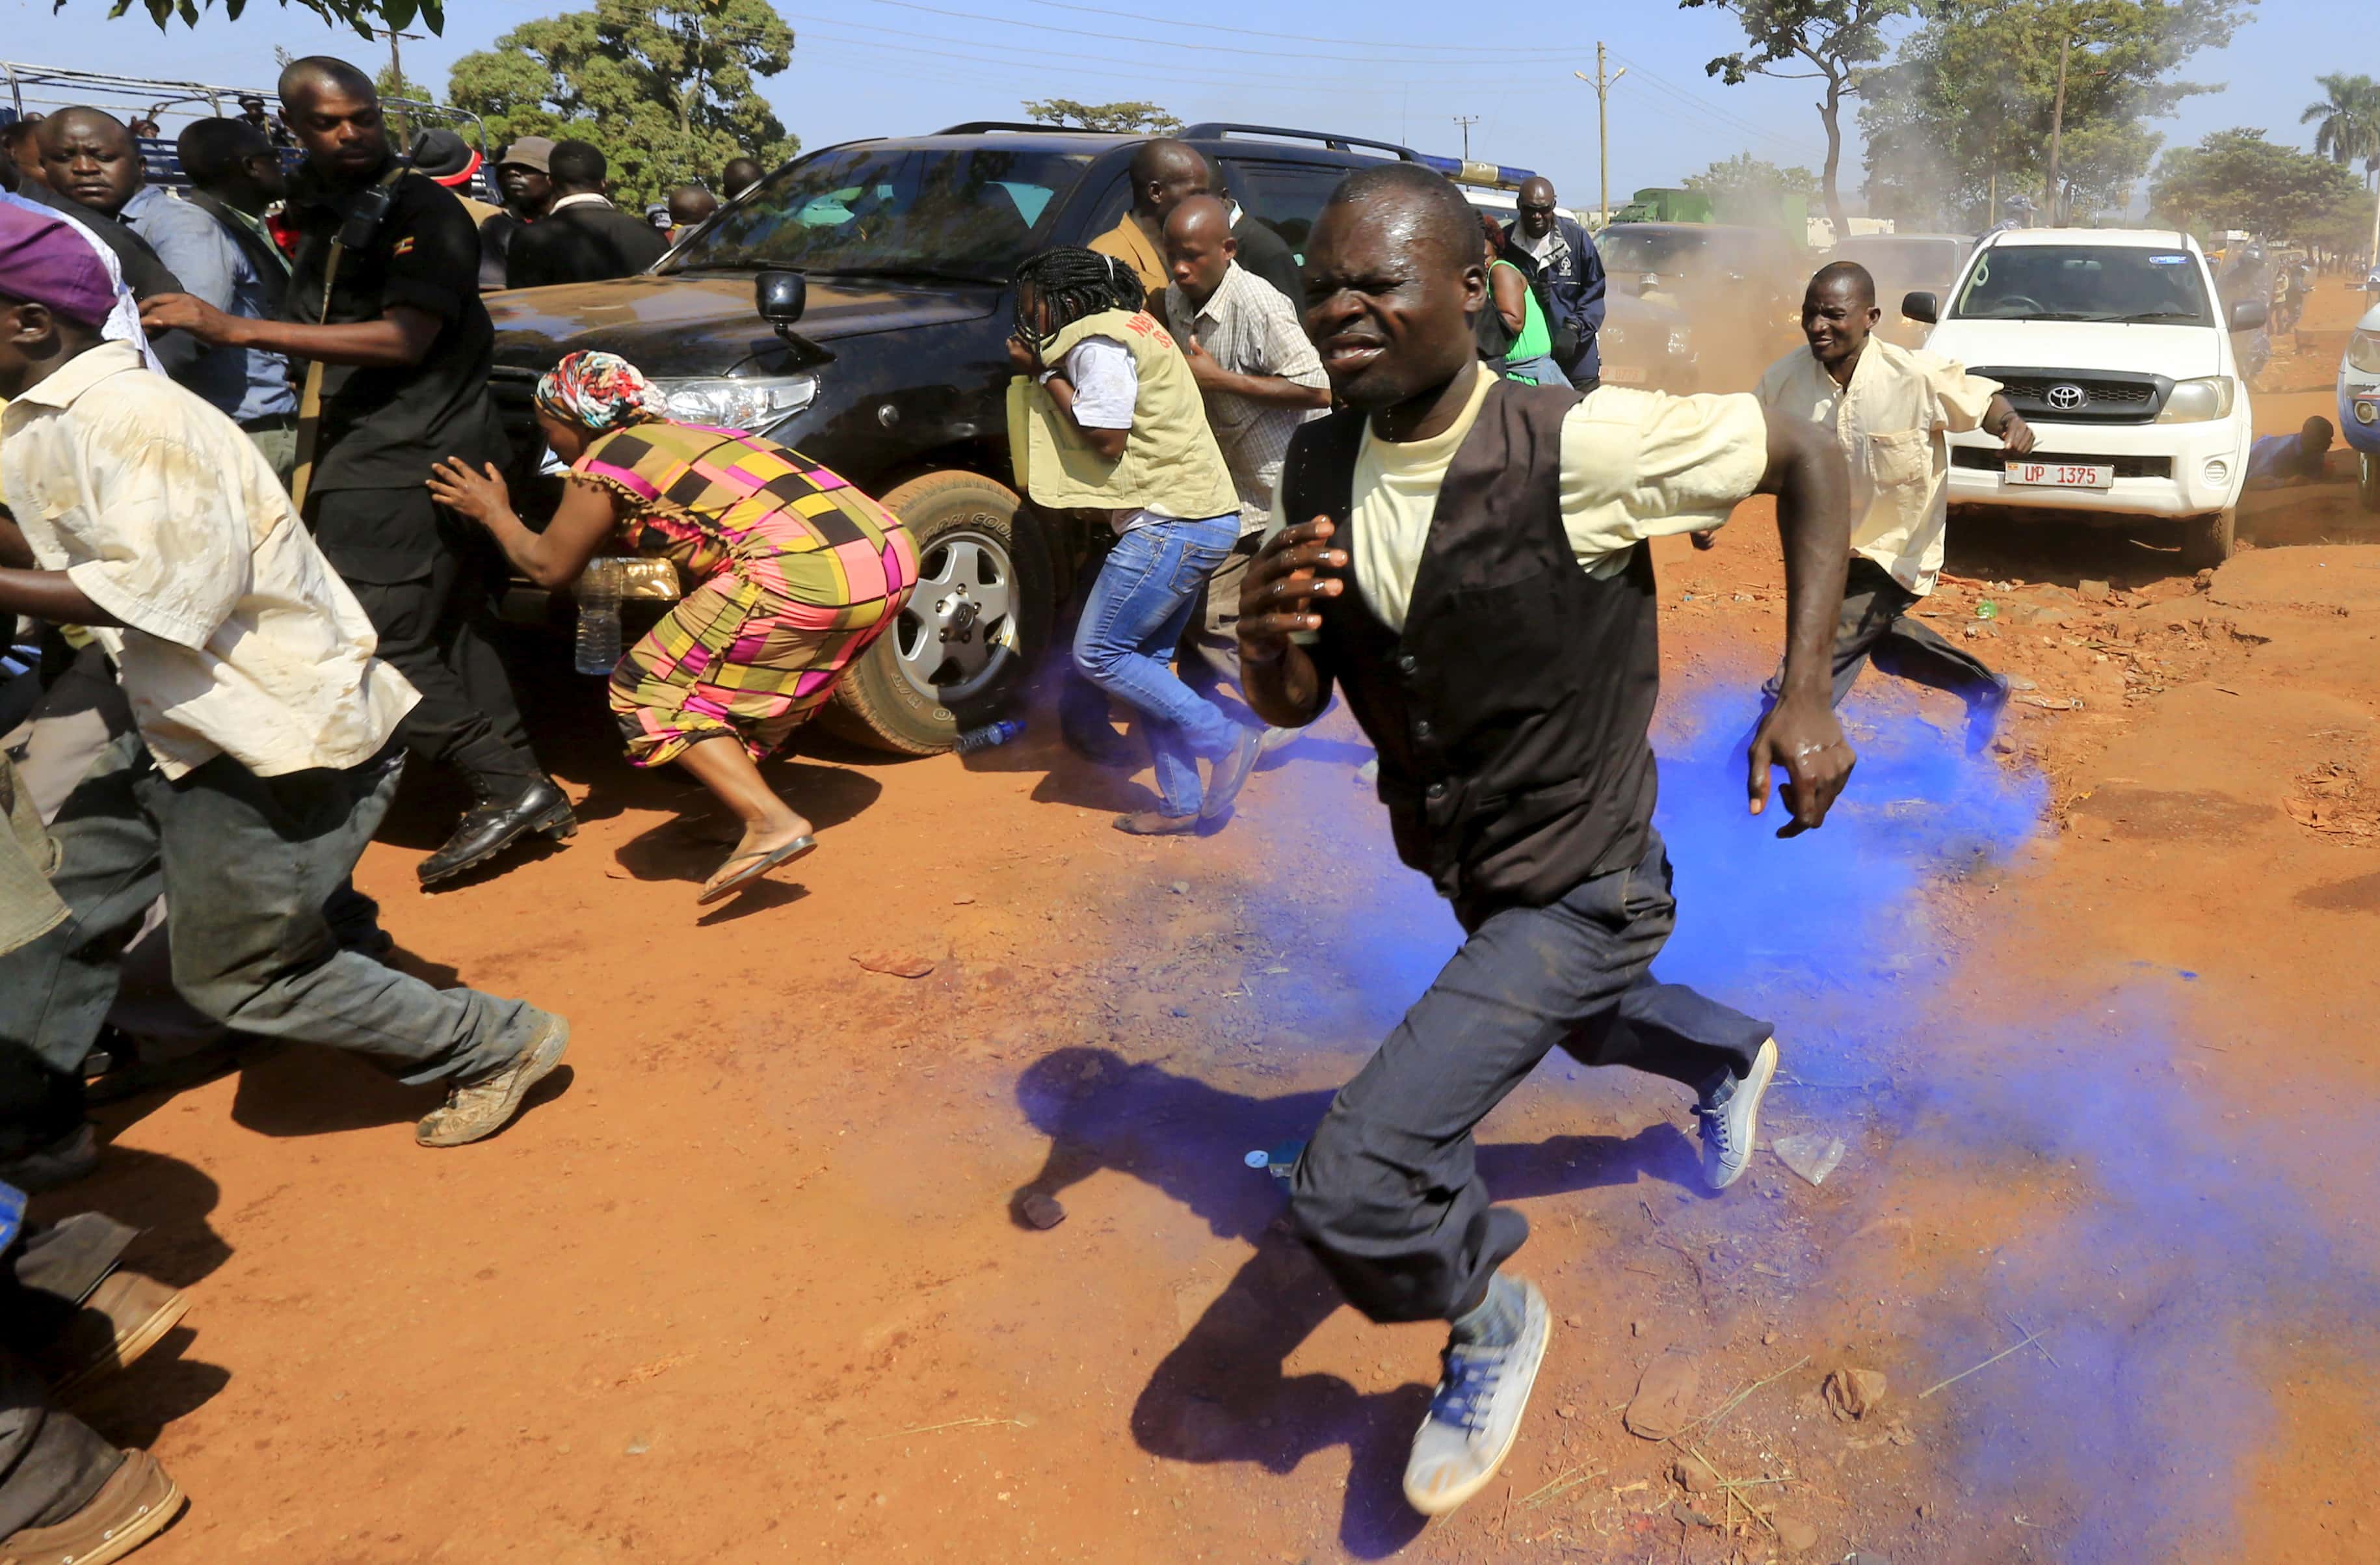 Supporters of Uganda's former Prime Minister Amama Mbabazi run from coloured tear gas canister police used to disperse a gathering in Jinja town in eastern Uganda, 10 September 2015, REUTERS/James Akena